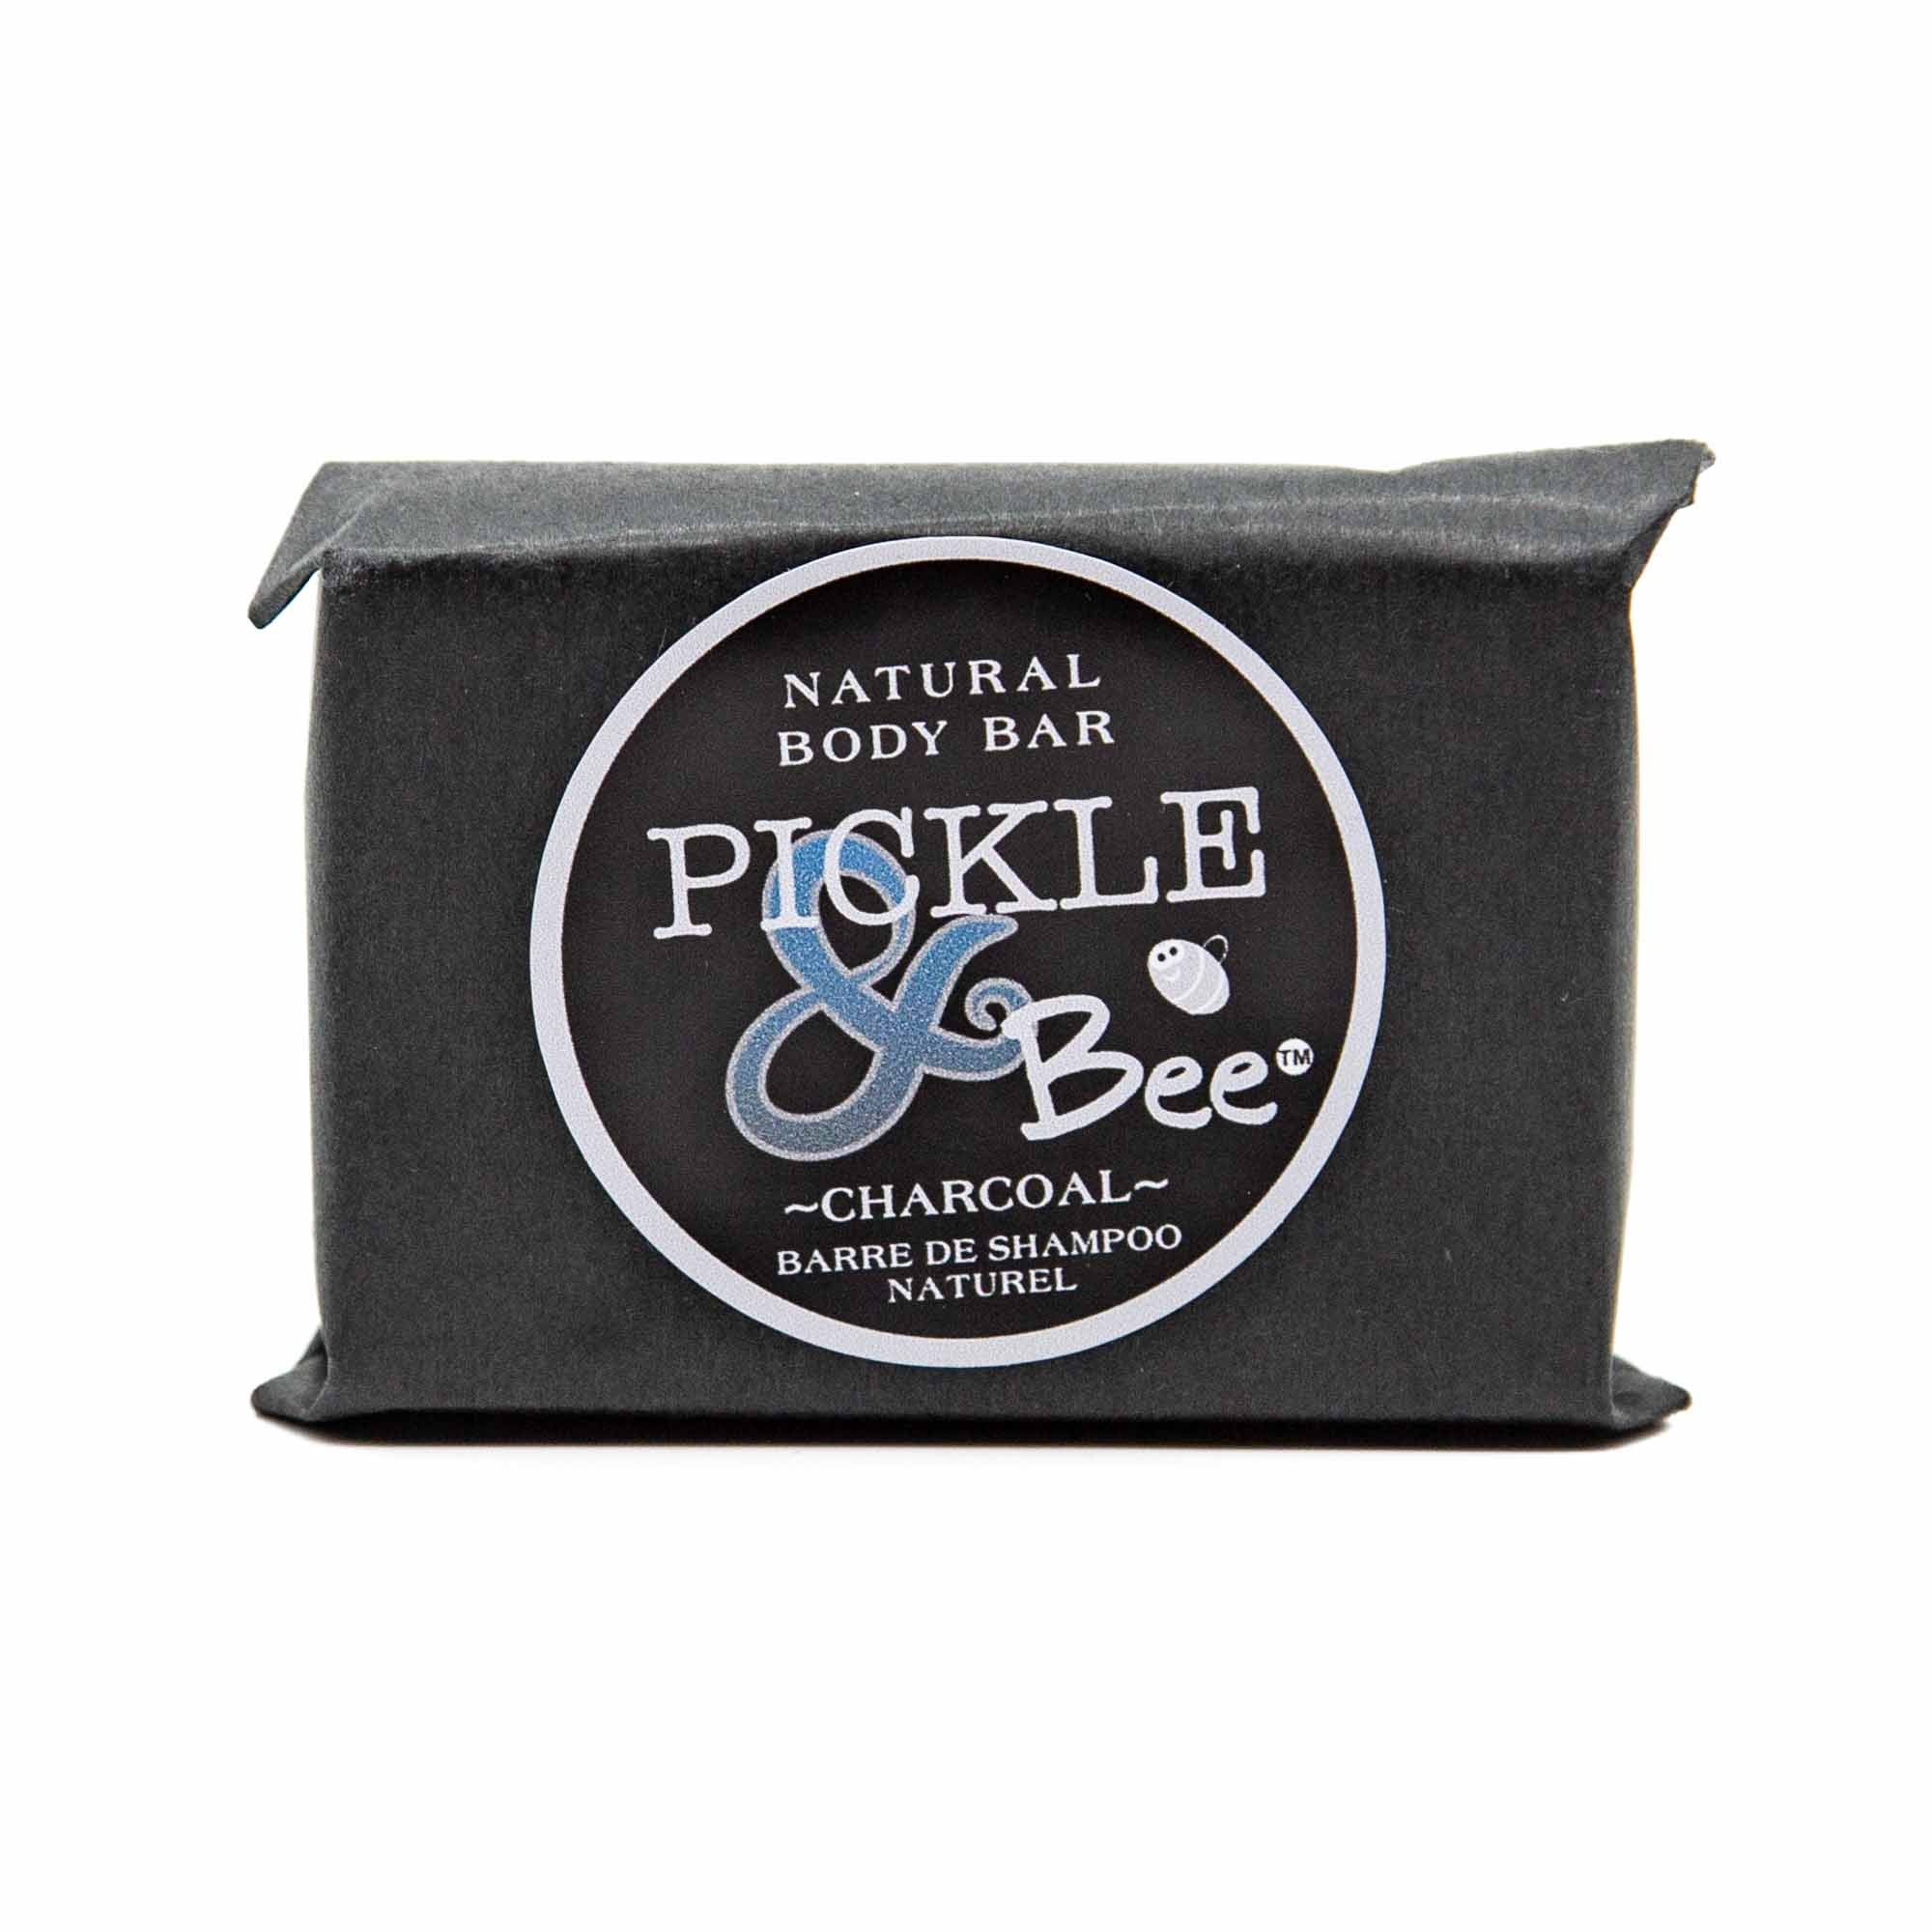 Pickle & Bee Body & Shave Bar - 6 Types - Mortise And Tenon